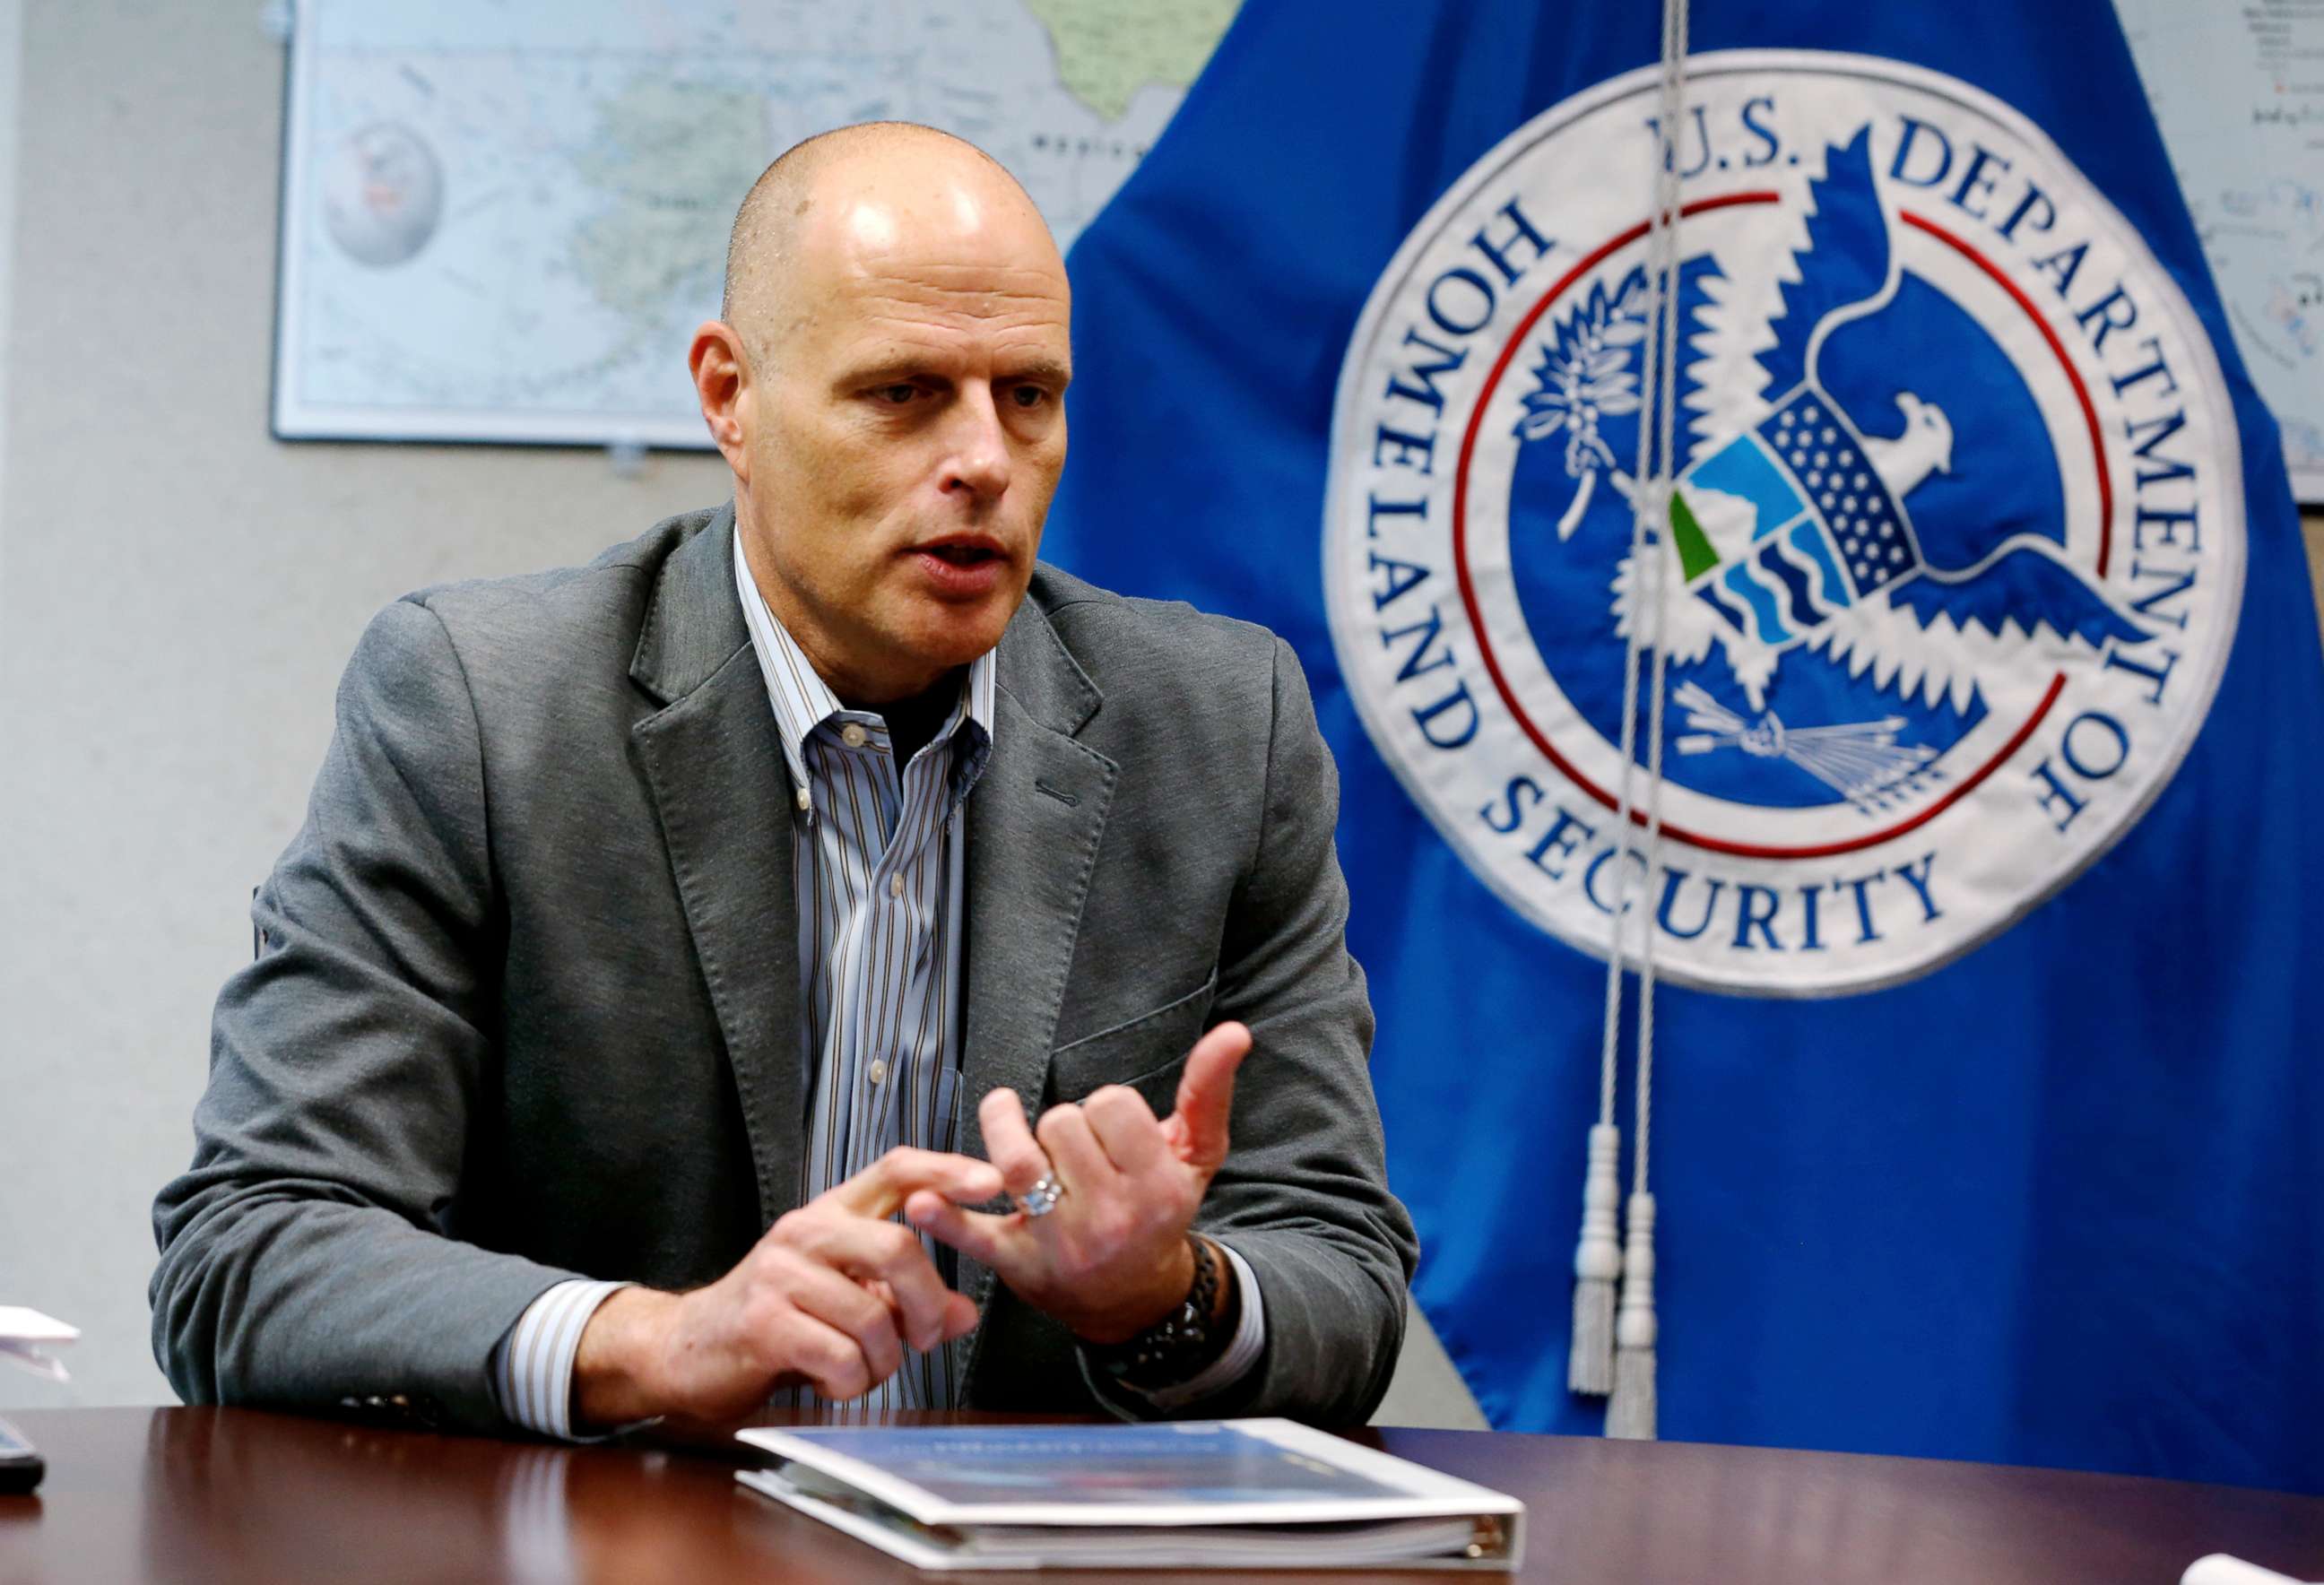 PHOTO: In this Nov. 9, 2018, photo, acting ICE director Ron Vitiello gestures during an interview in Richmond, Va.